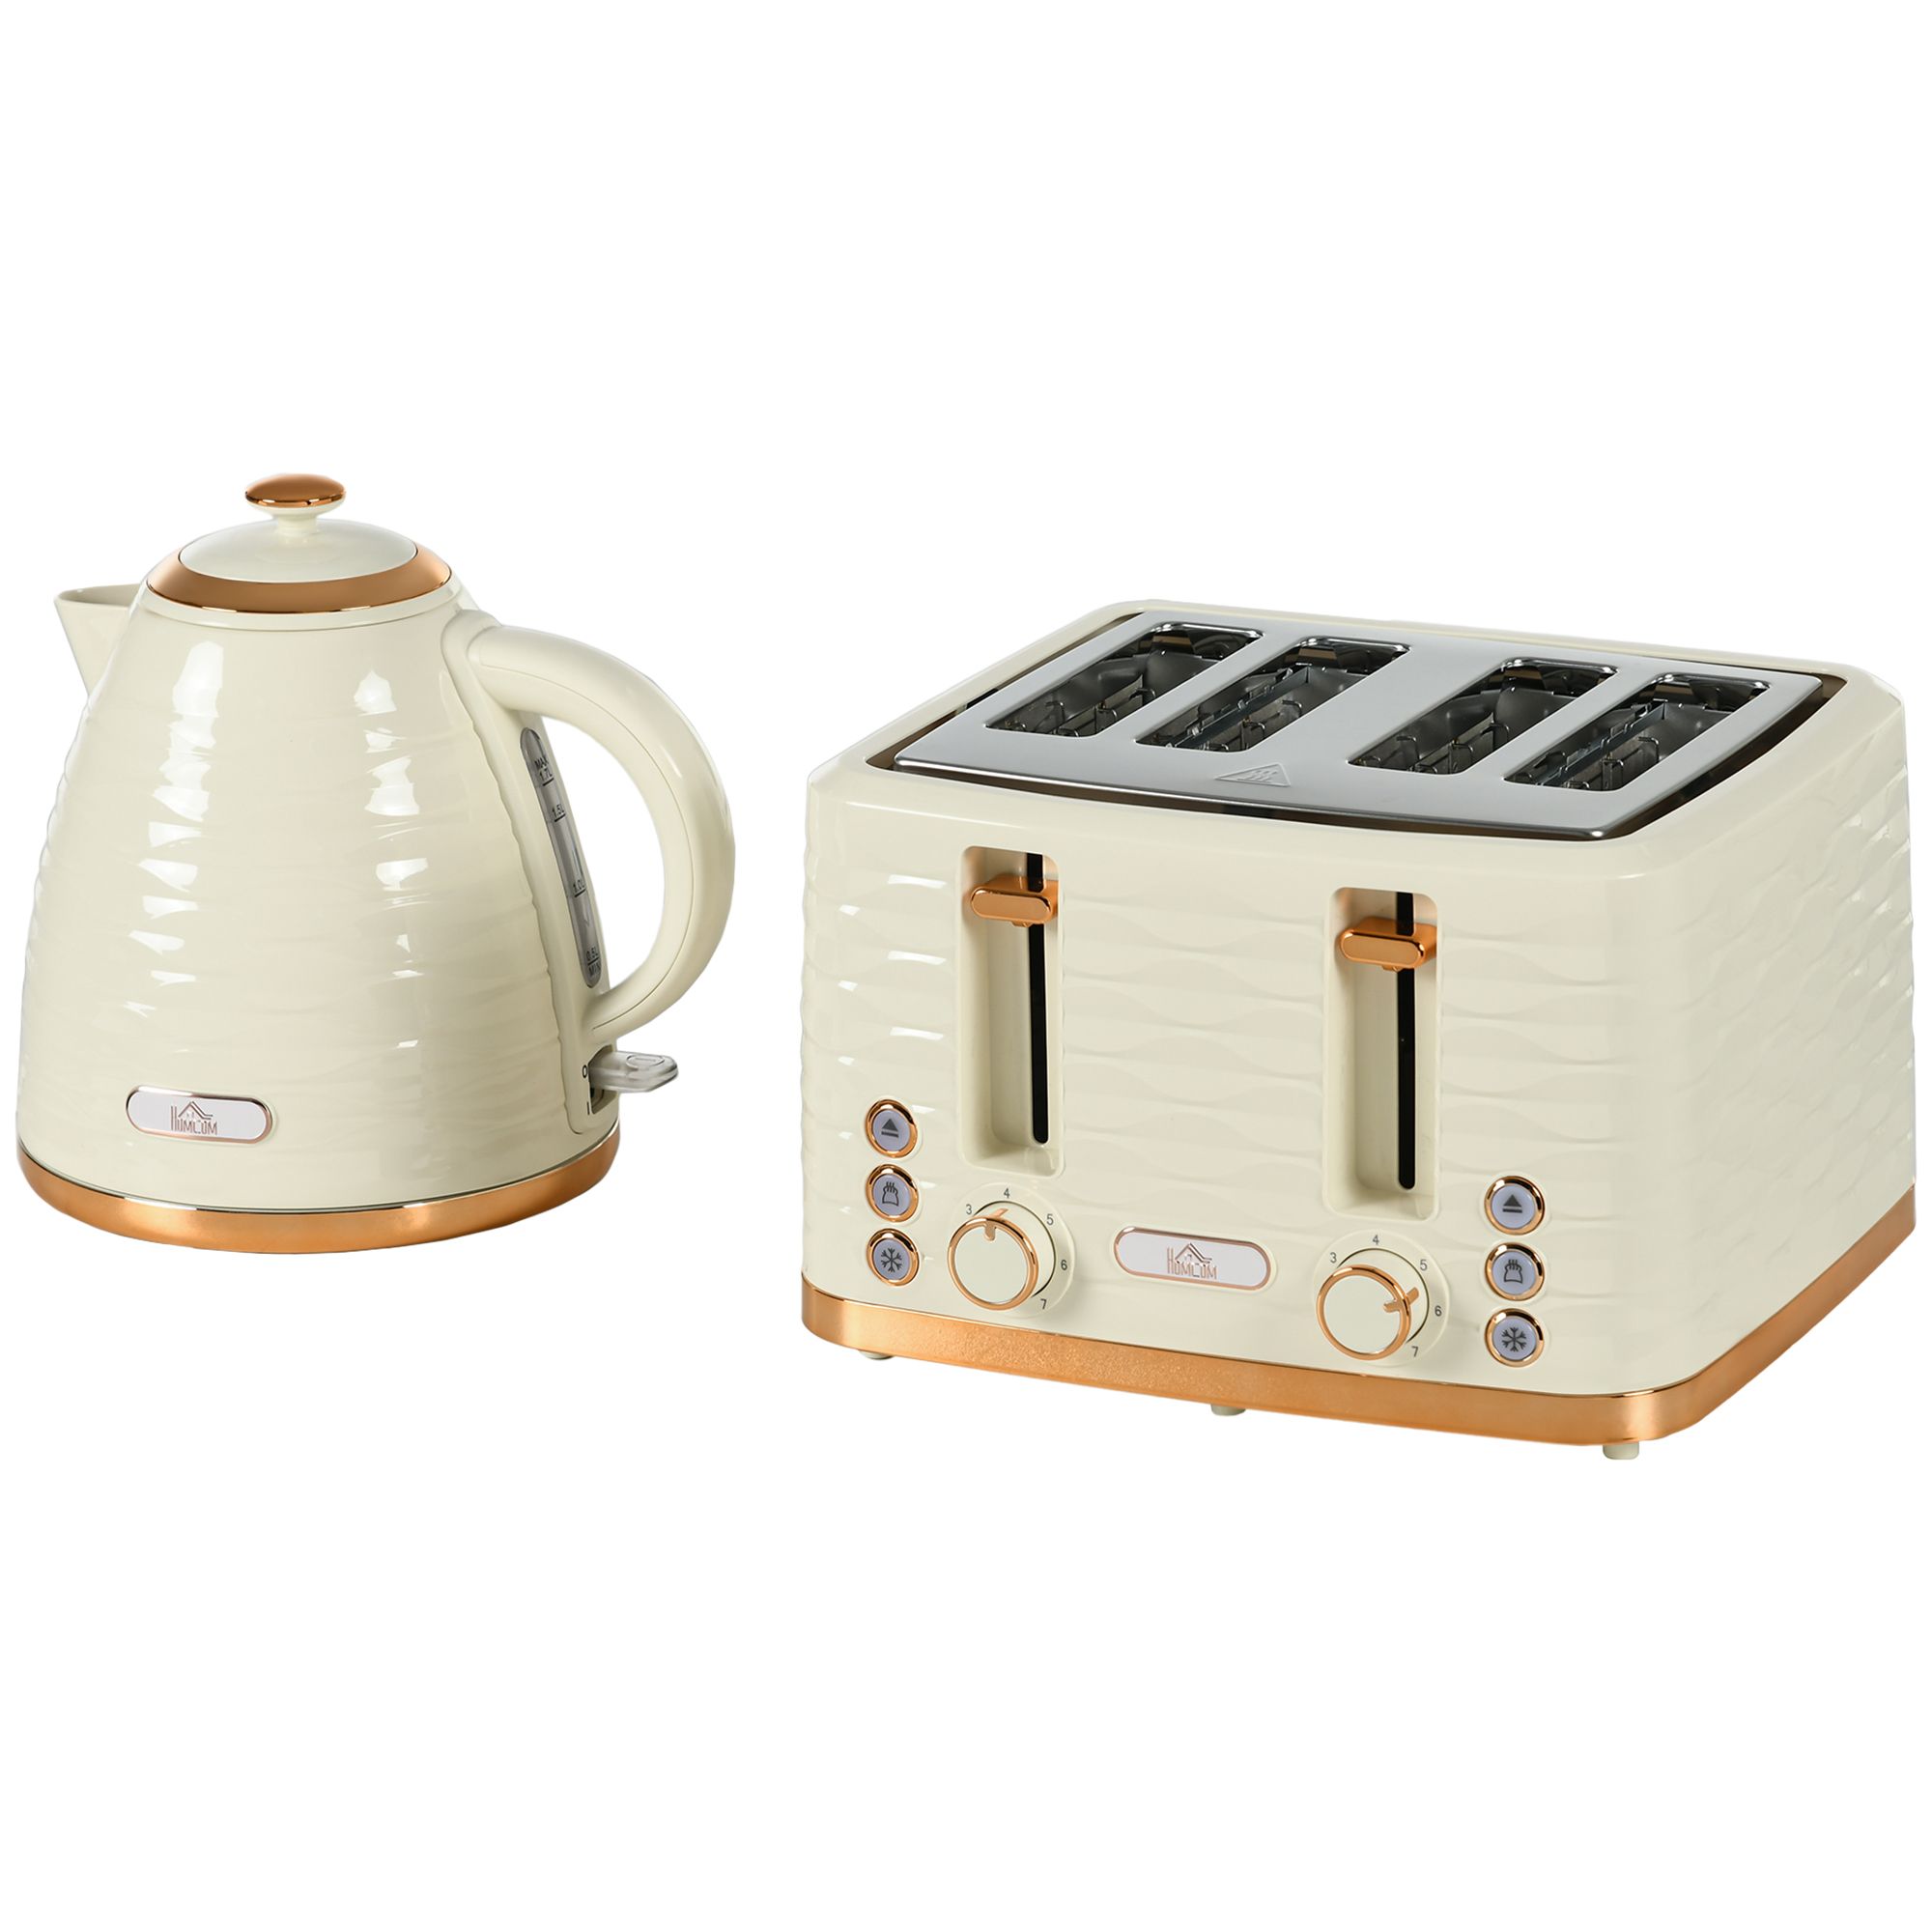 Homcom 3000w 1.7l Rapid Boil Kettle & 4 Slice Toaster, Kettle And Toaster Set With 7 Browning Controls And Crumb Tray, Beige